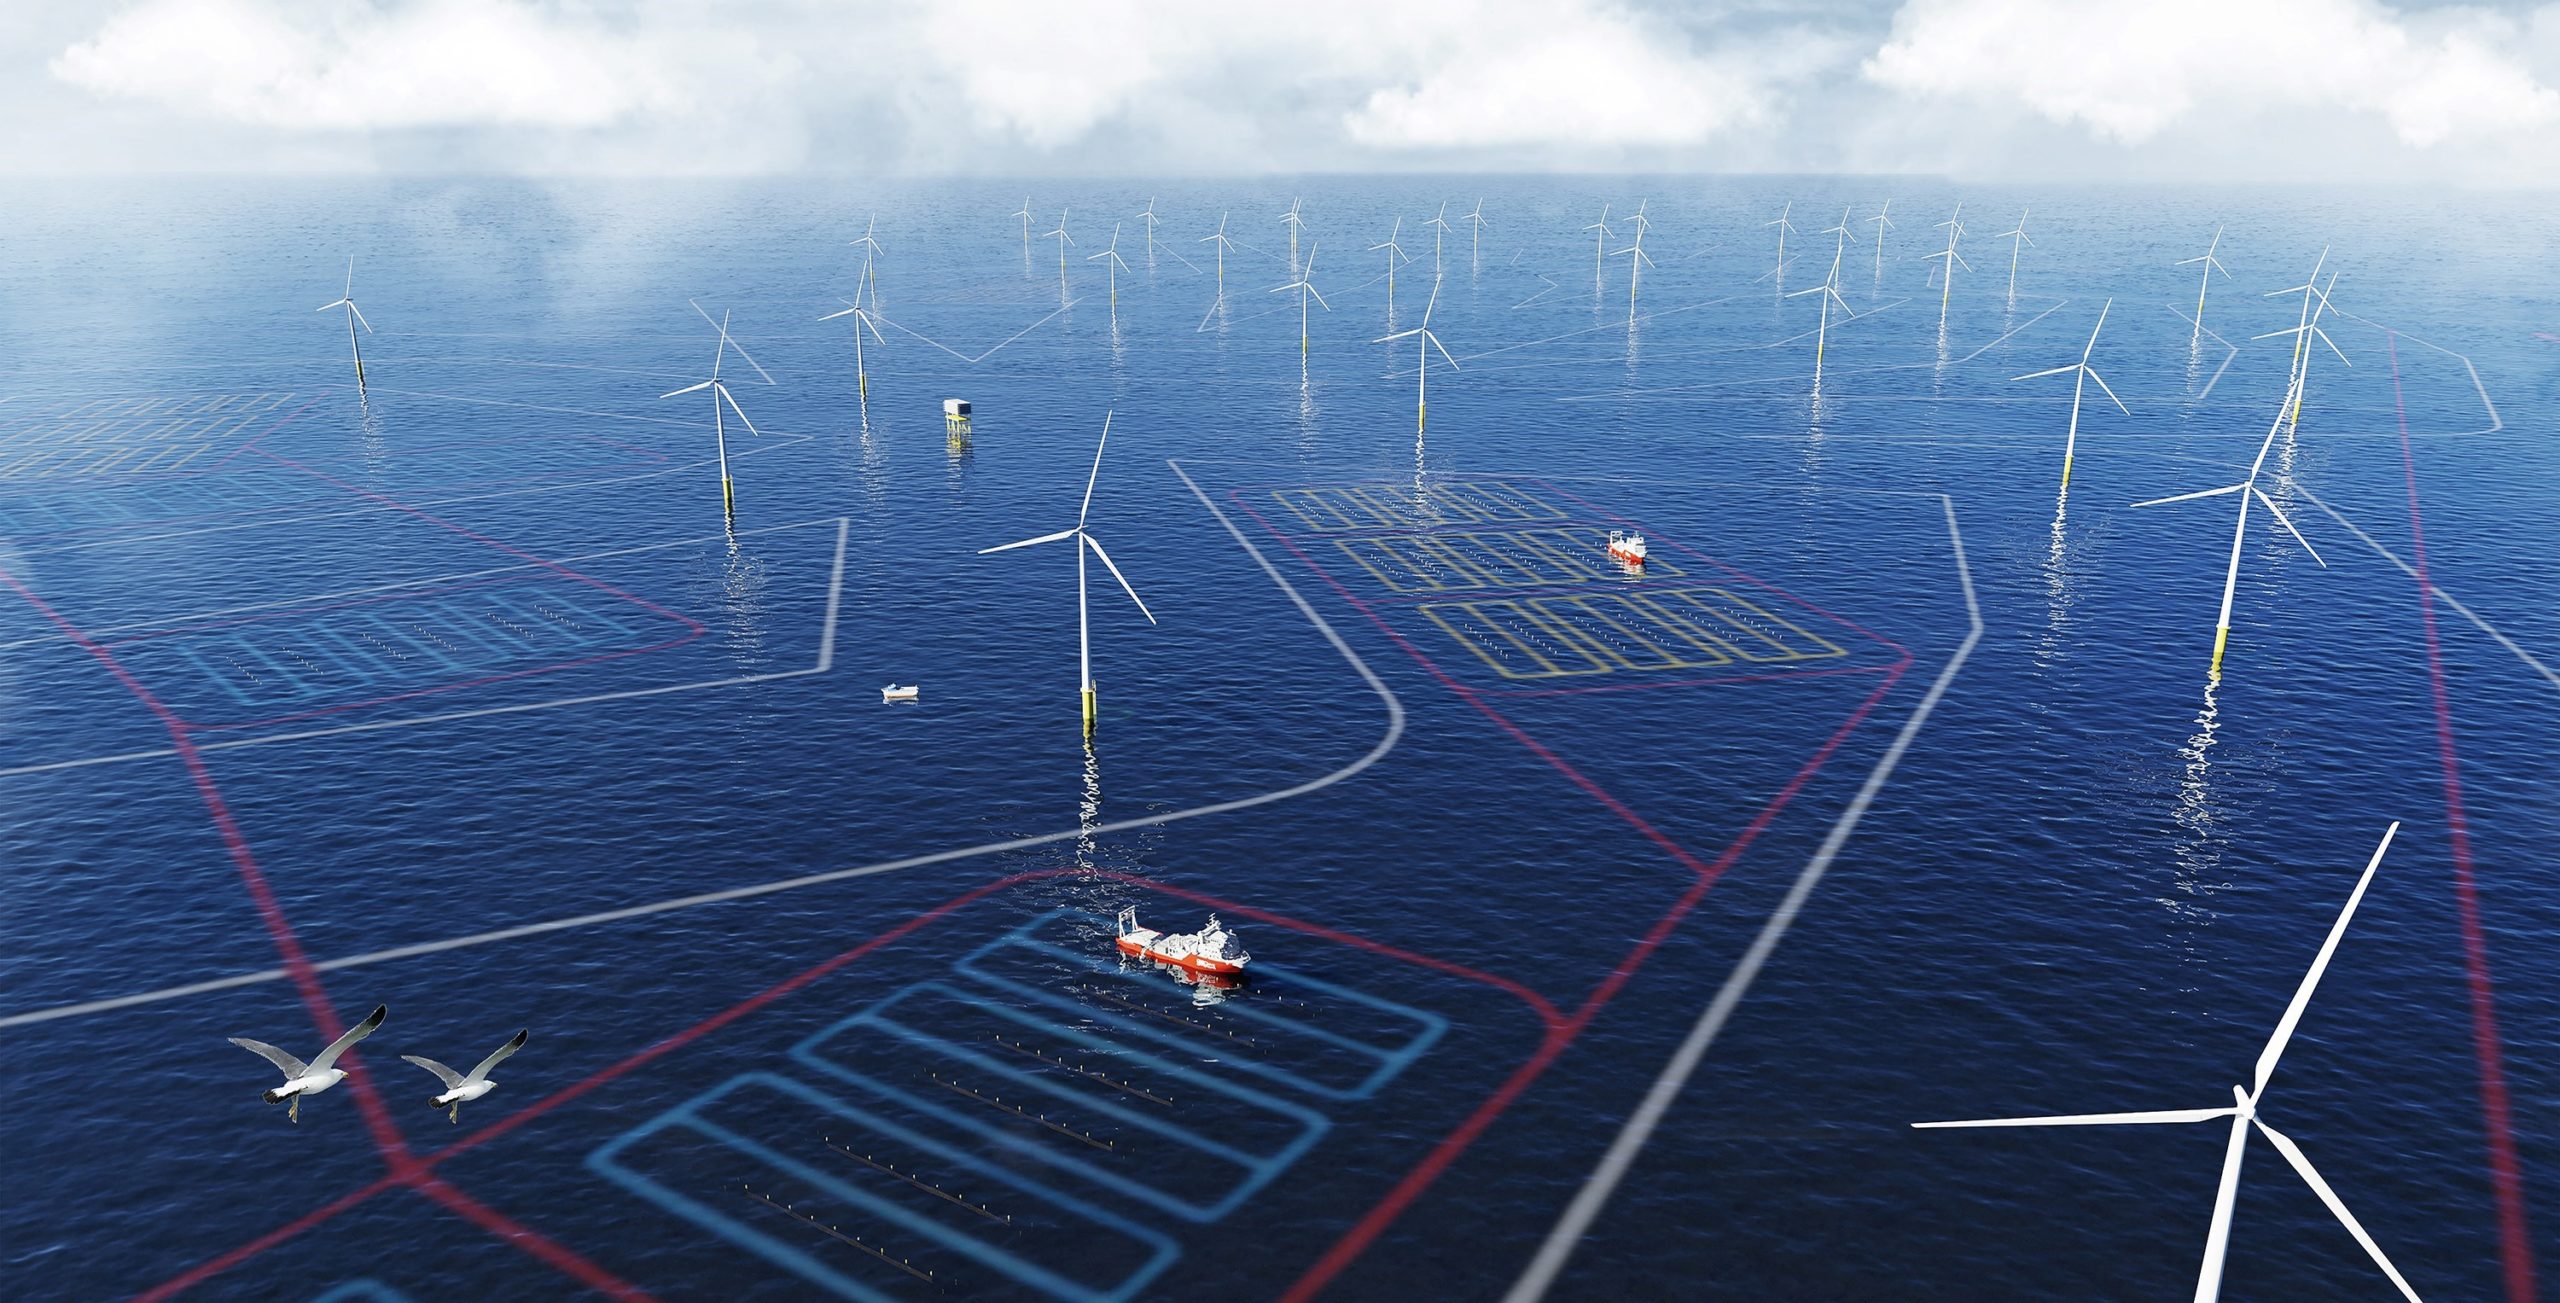 CGI-of-how-a-seaweed-farm-between-offshore-wind-turbines-could-look-from-above-the-ocean-©Smartland